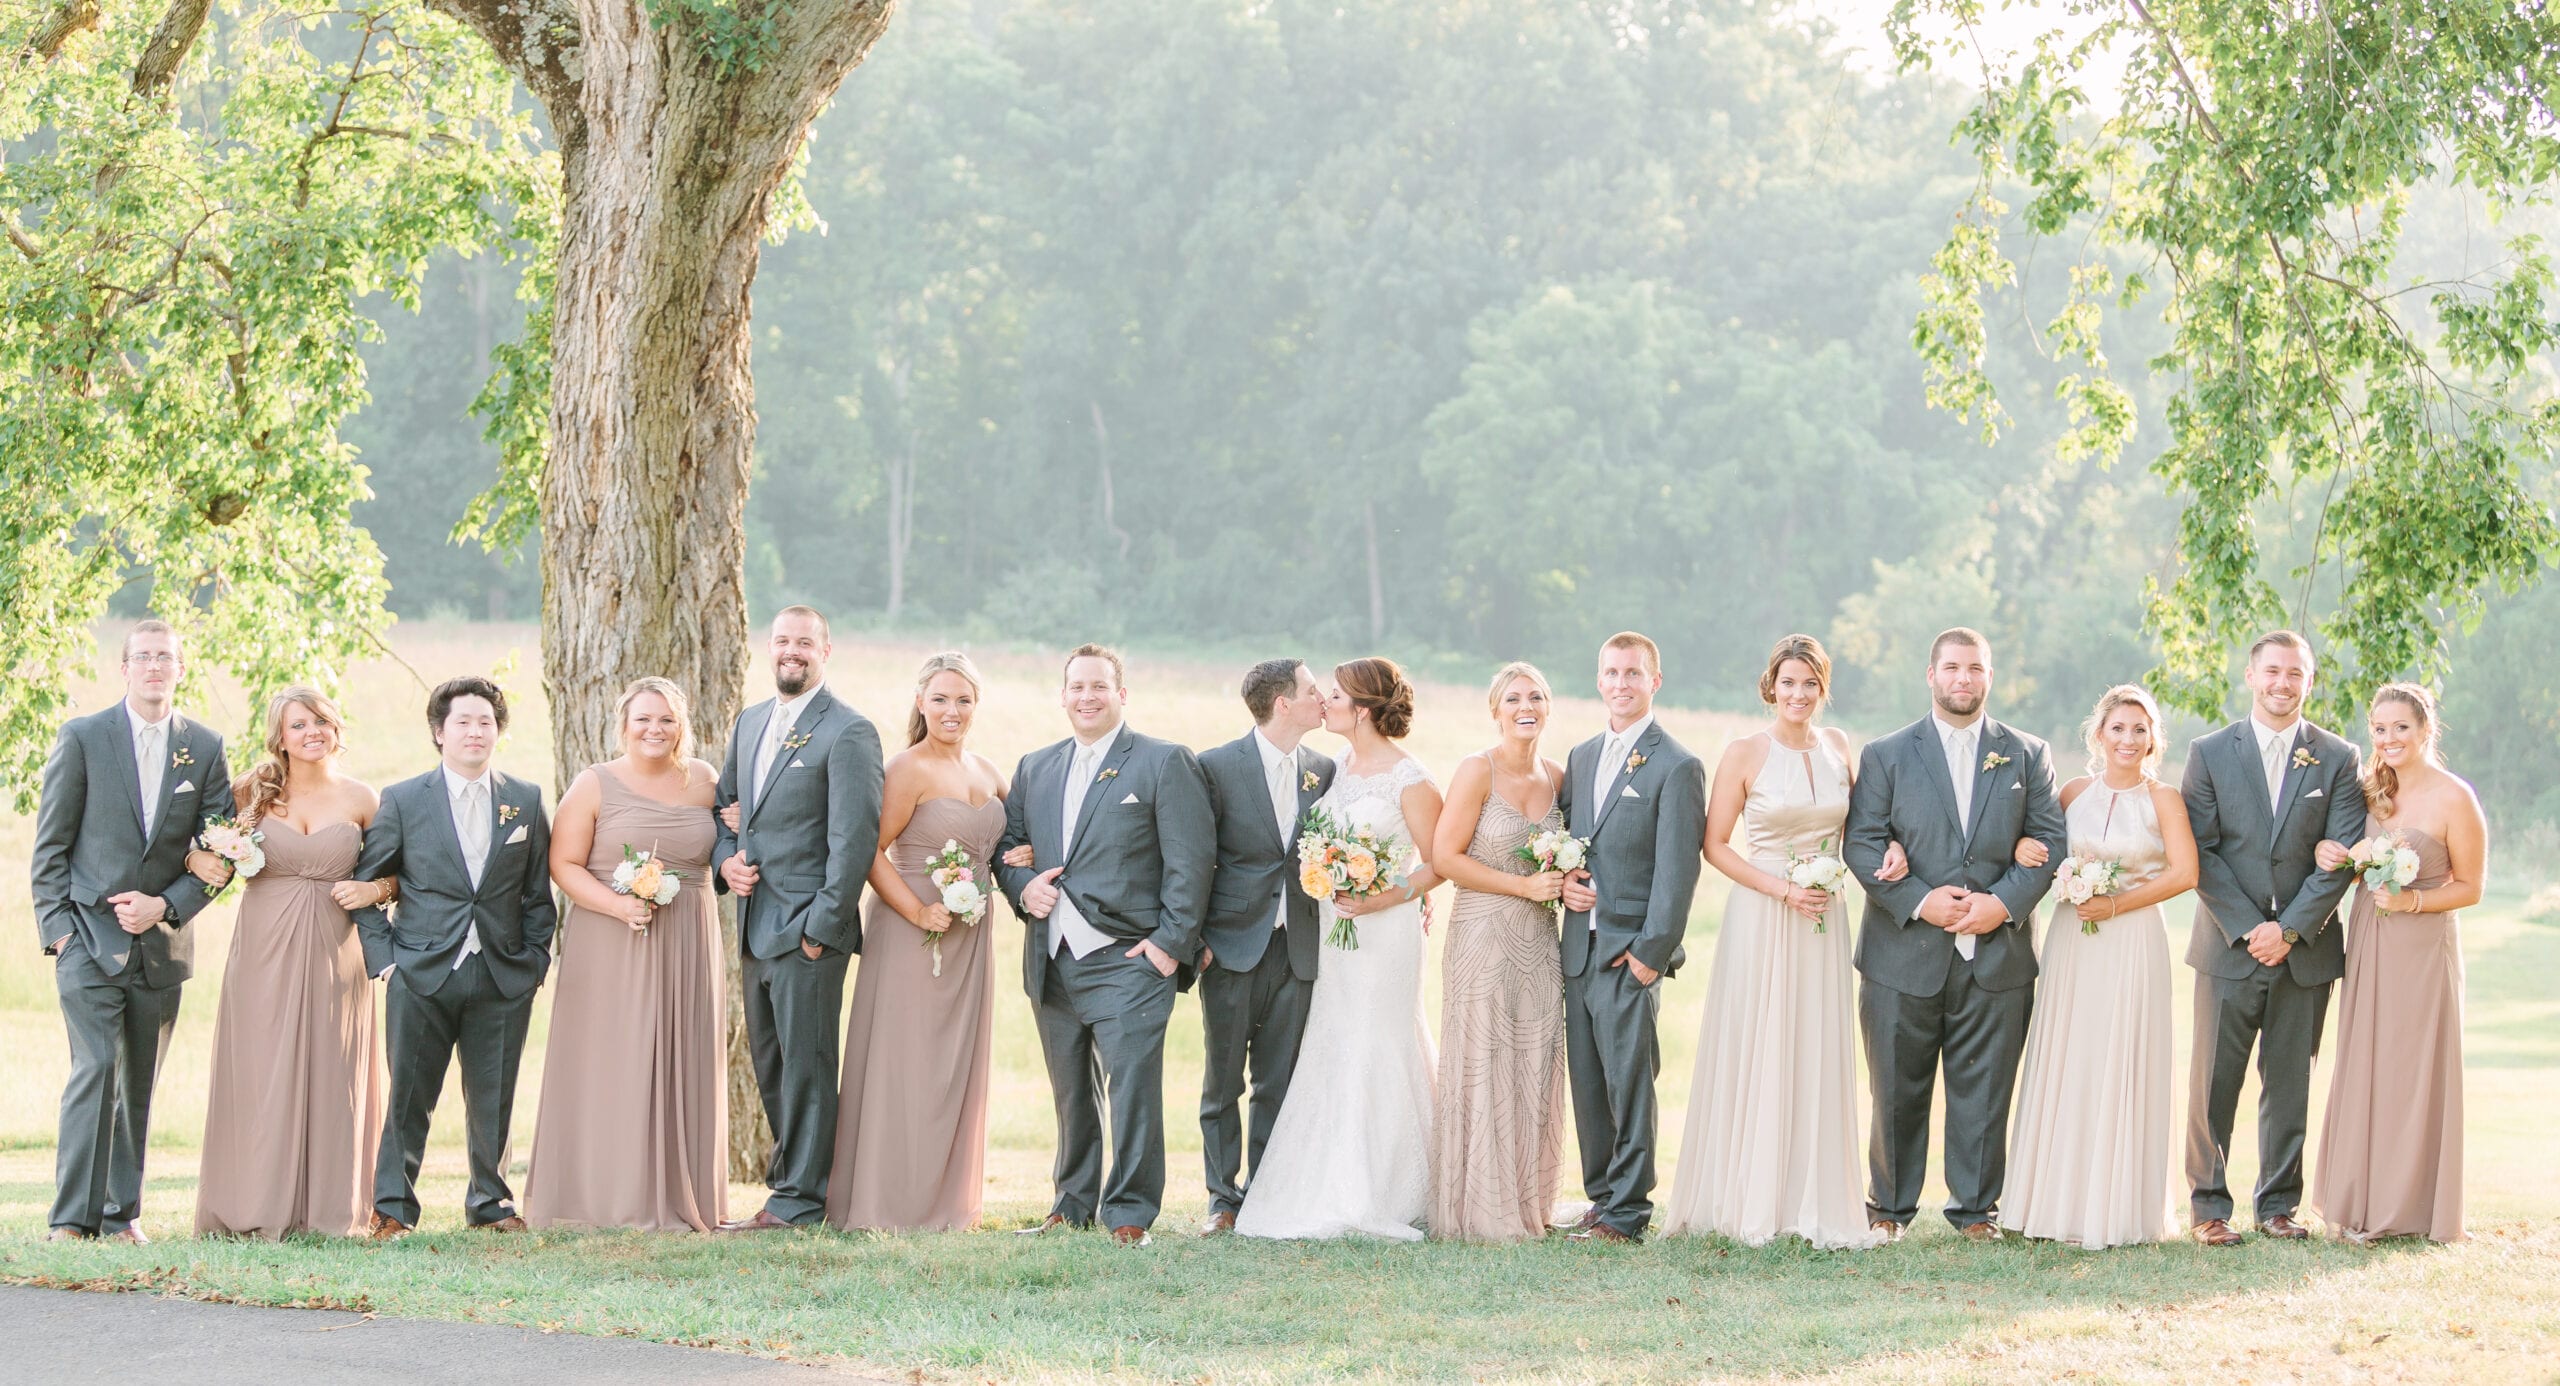 Romantic Fall Wedding at Belmont Manor | Photography by Lauren Myers Photography #EED #champagnewedding #romantic